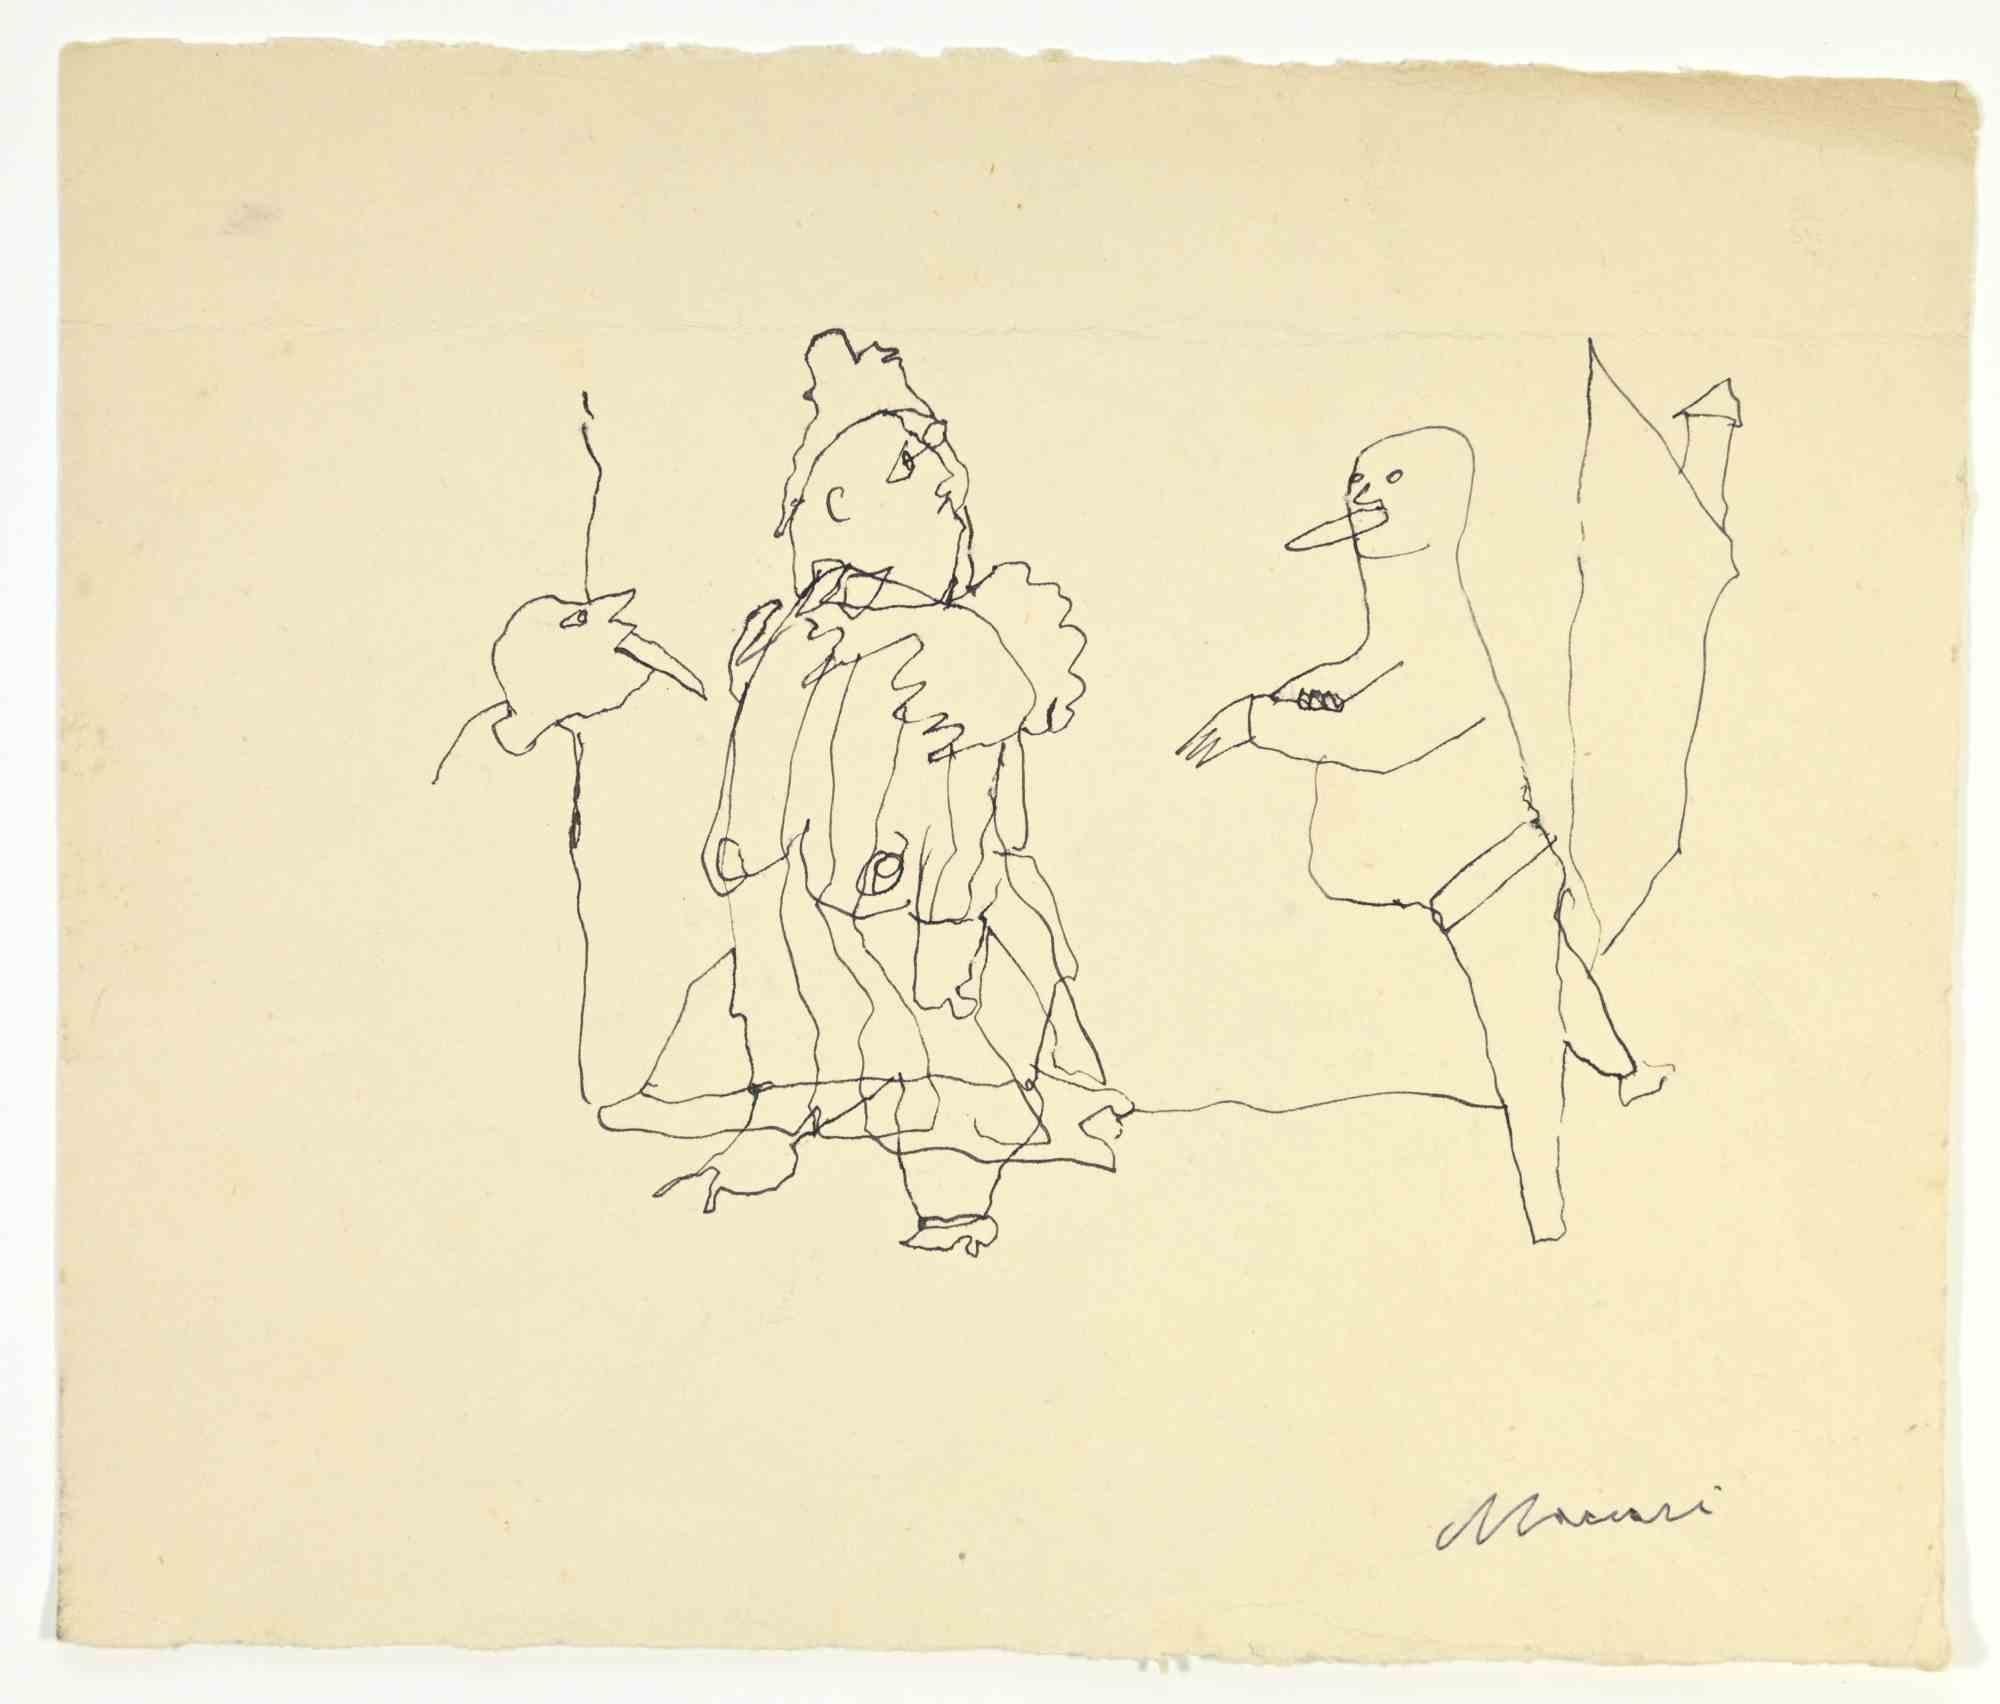 Belittled is a Pen Drawing realized by Mino Maccari  (1924-1989) in the 1960s.

Hand-signed on the lower.

Good condition.

Mino Maccari (Siena, 1924-Rome, June 16, 1989) was an Italian writer, painter, engraver and journalist, winner of the